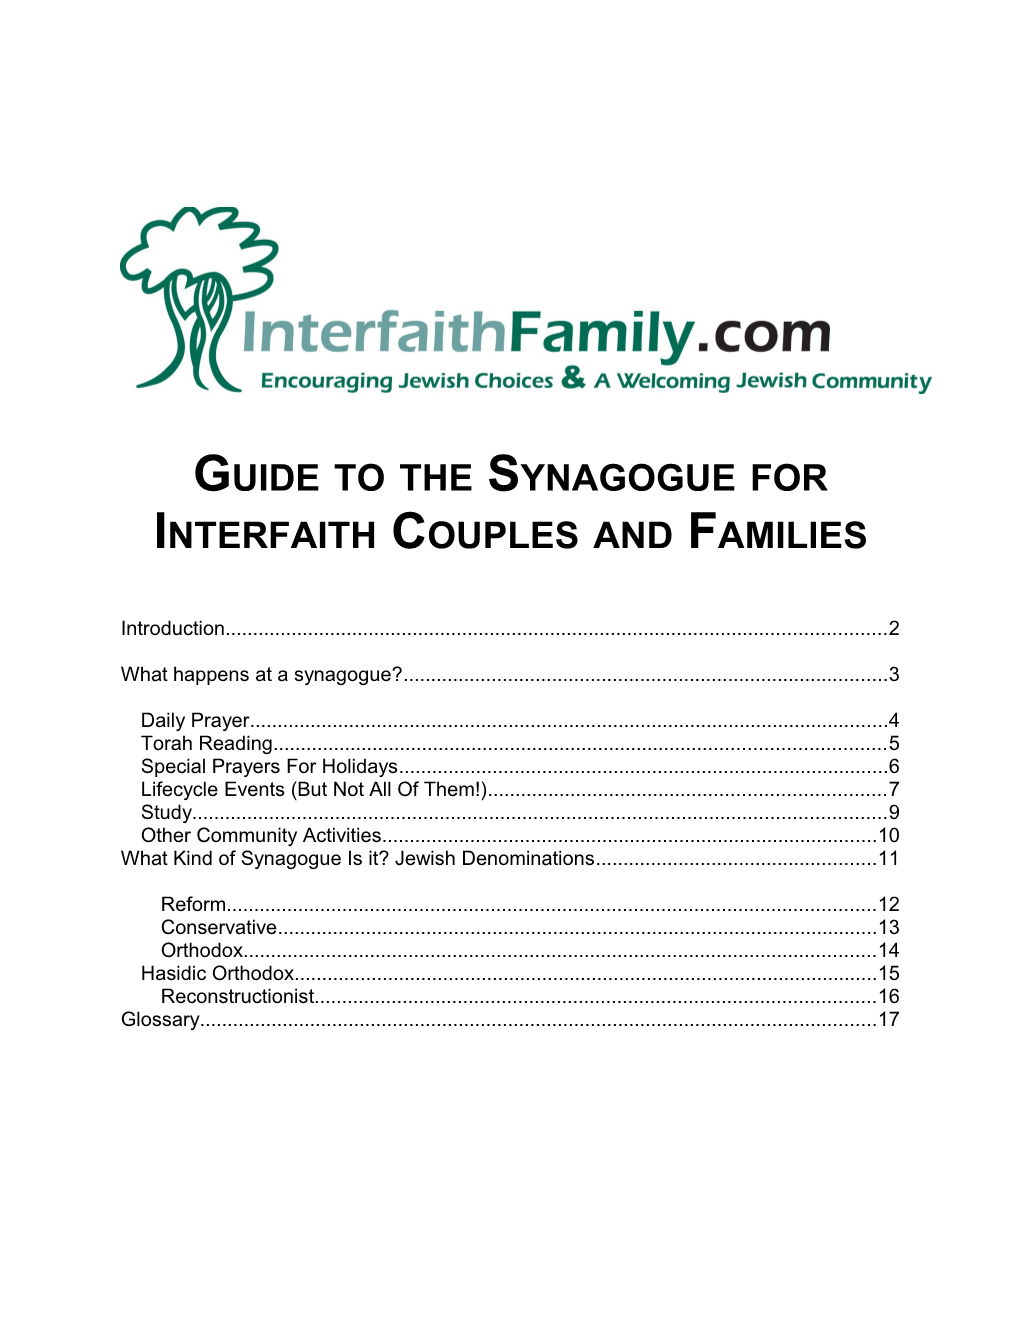 Guide to the Synagogue